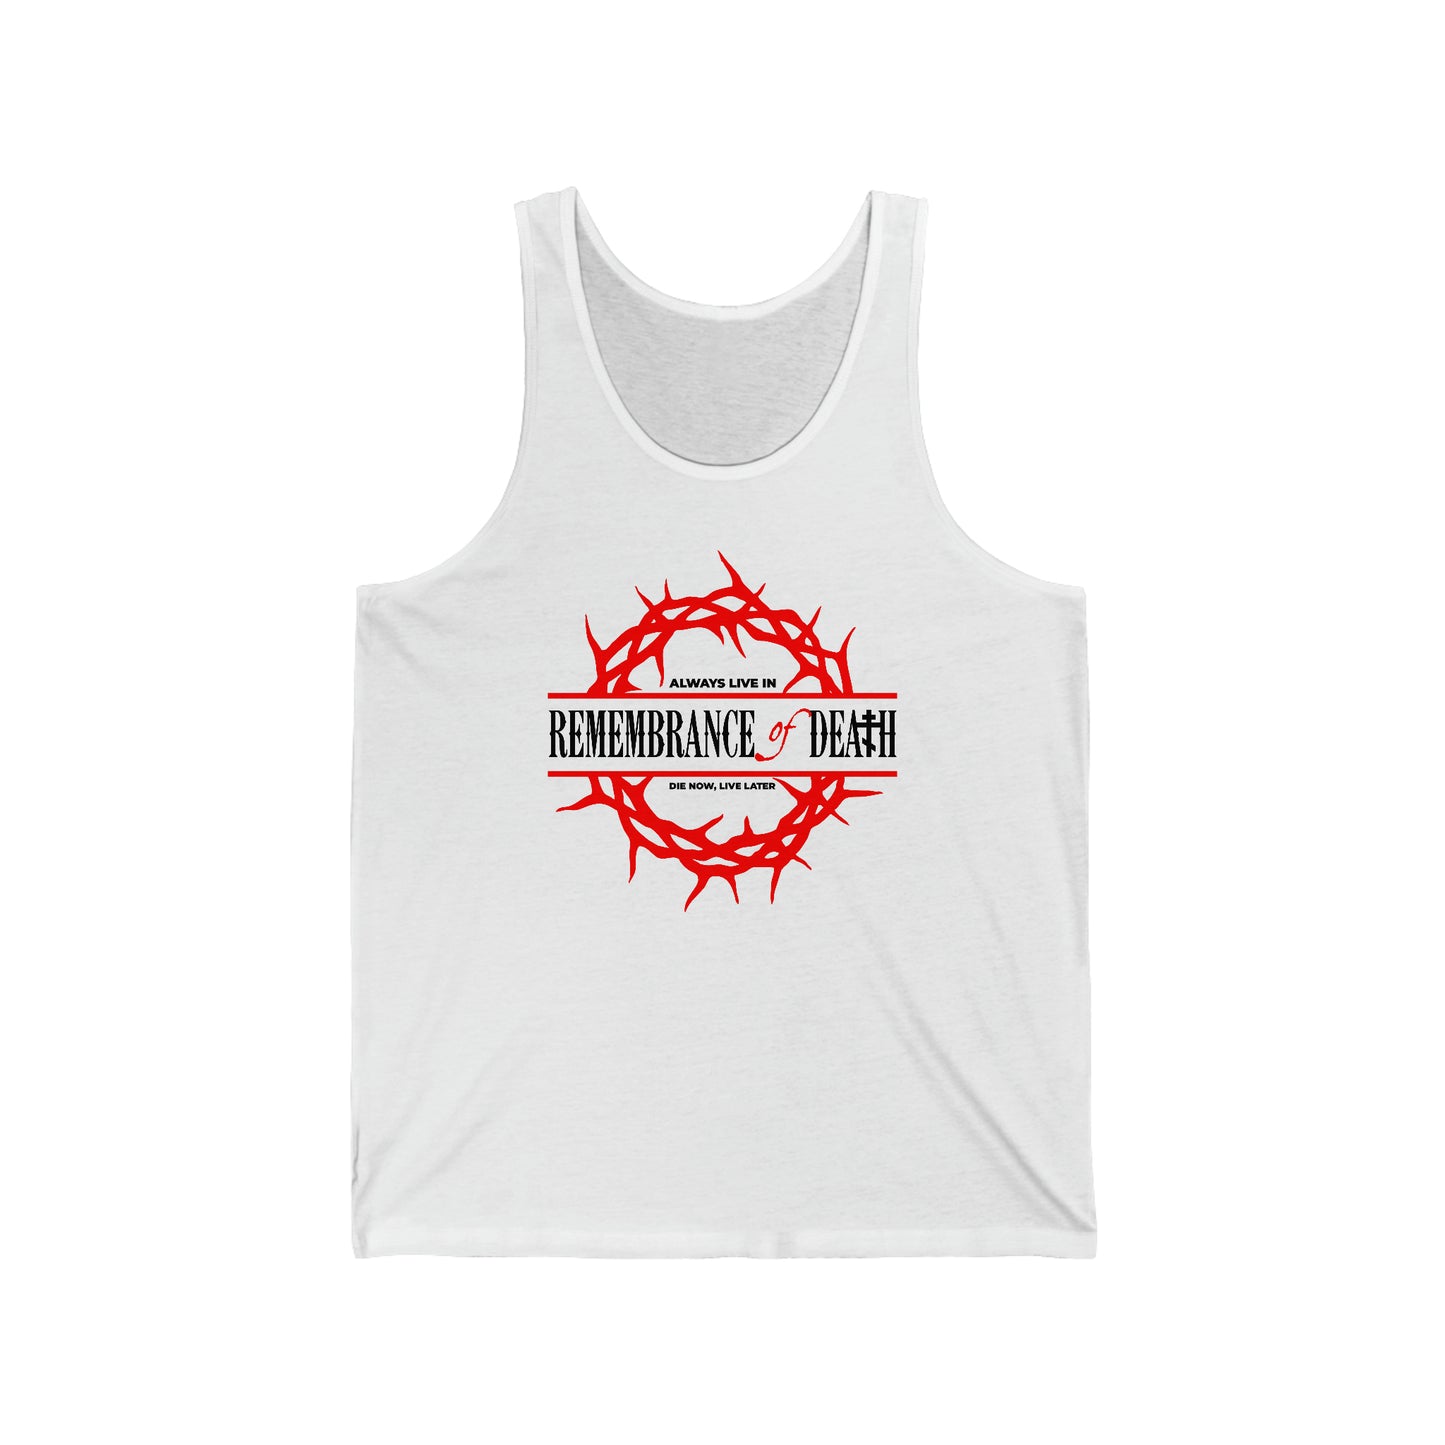 Always Live in Remembrance of Death No. 1 | Orthodox Christian Jersey Tank Top / Sleeveless Shirt